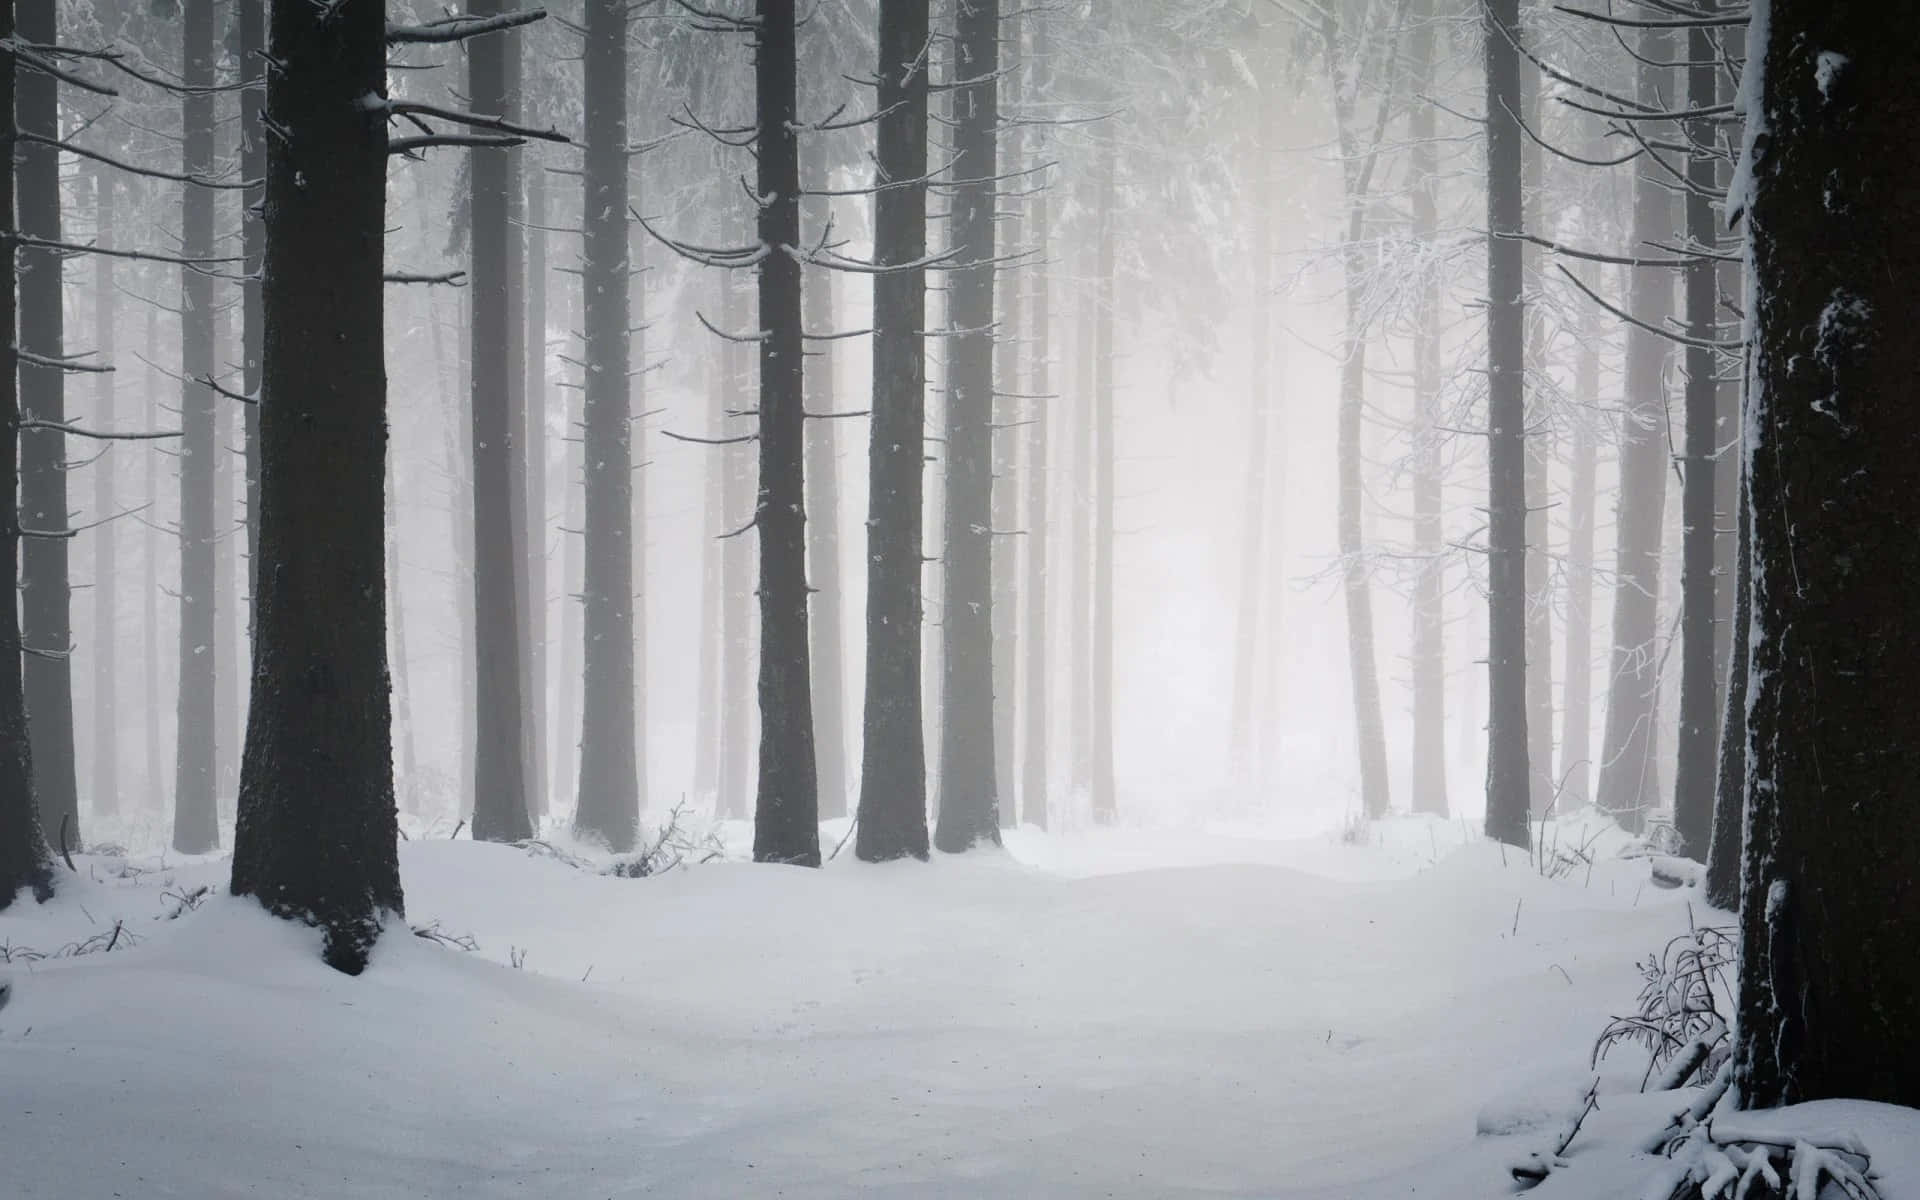 Feel the Magic of Winter in this Serene Forest